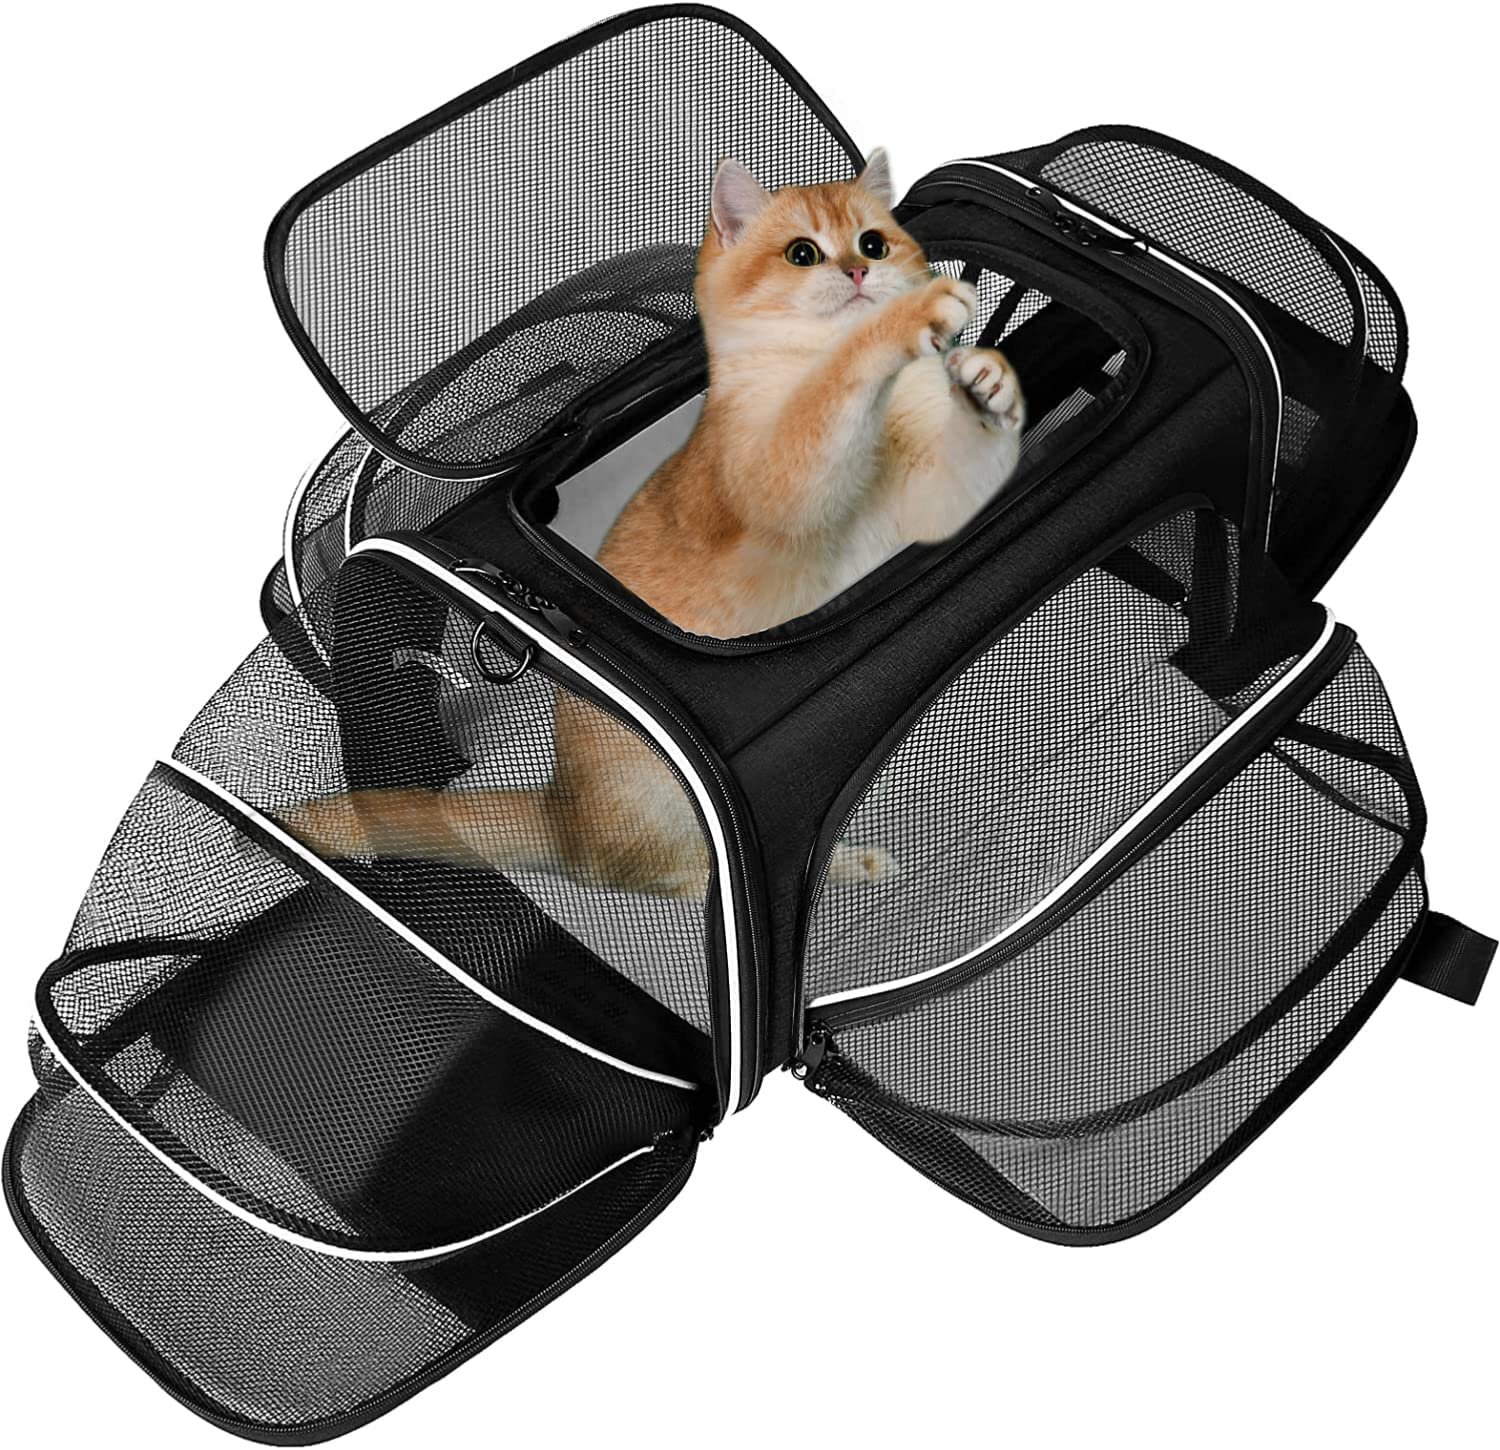 Large, Carbon Black X-ZONE PET Airline Approved Pet Carriers,Comes with Fleece Pads Soft Sided Pet Carrier for Dog & Cat